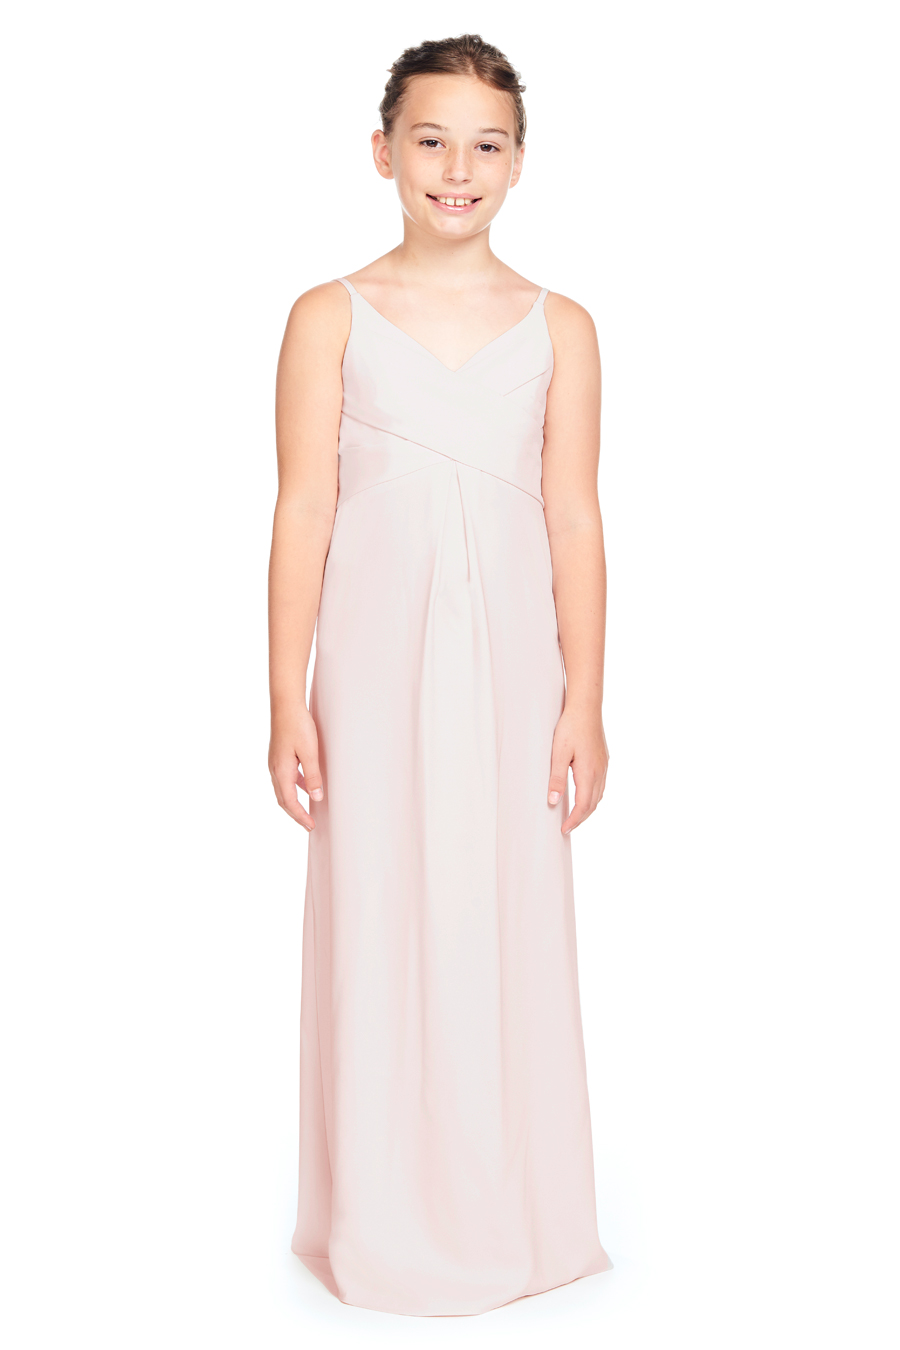 Junior bridesmaid dress with center front inverted box pleated skirt